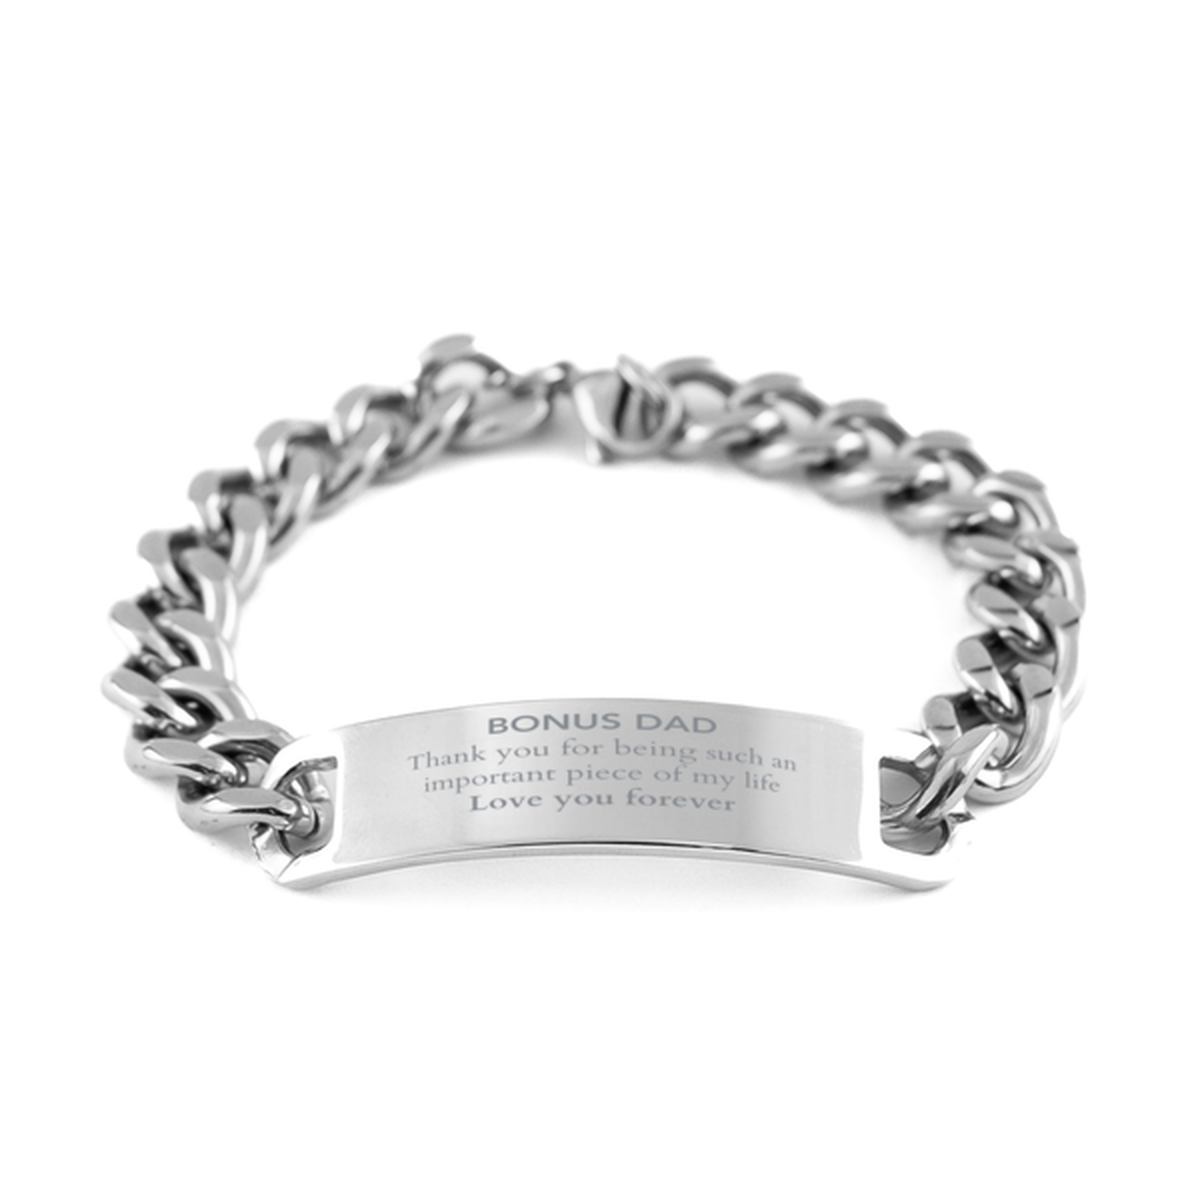 Appropriate Bonus Dad Cuban Chain Stainless Steel Bracelet Epic Birthday Gifts for Bonus Dad Thank you for being such an important piece of my life Bonus Dad Christmas Mothers Fathers Day